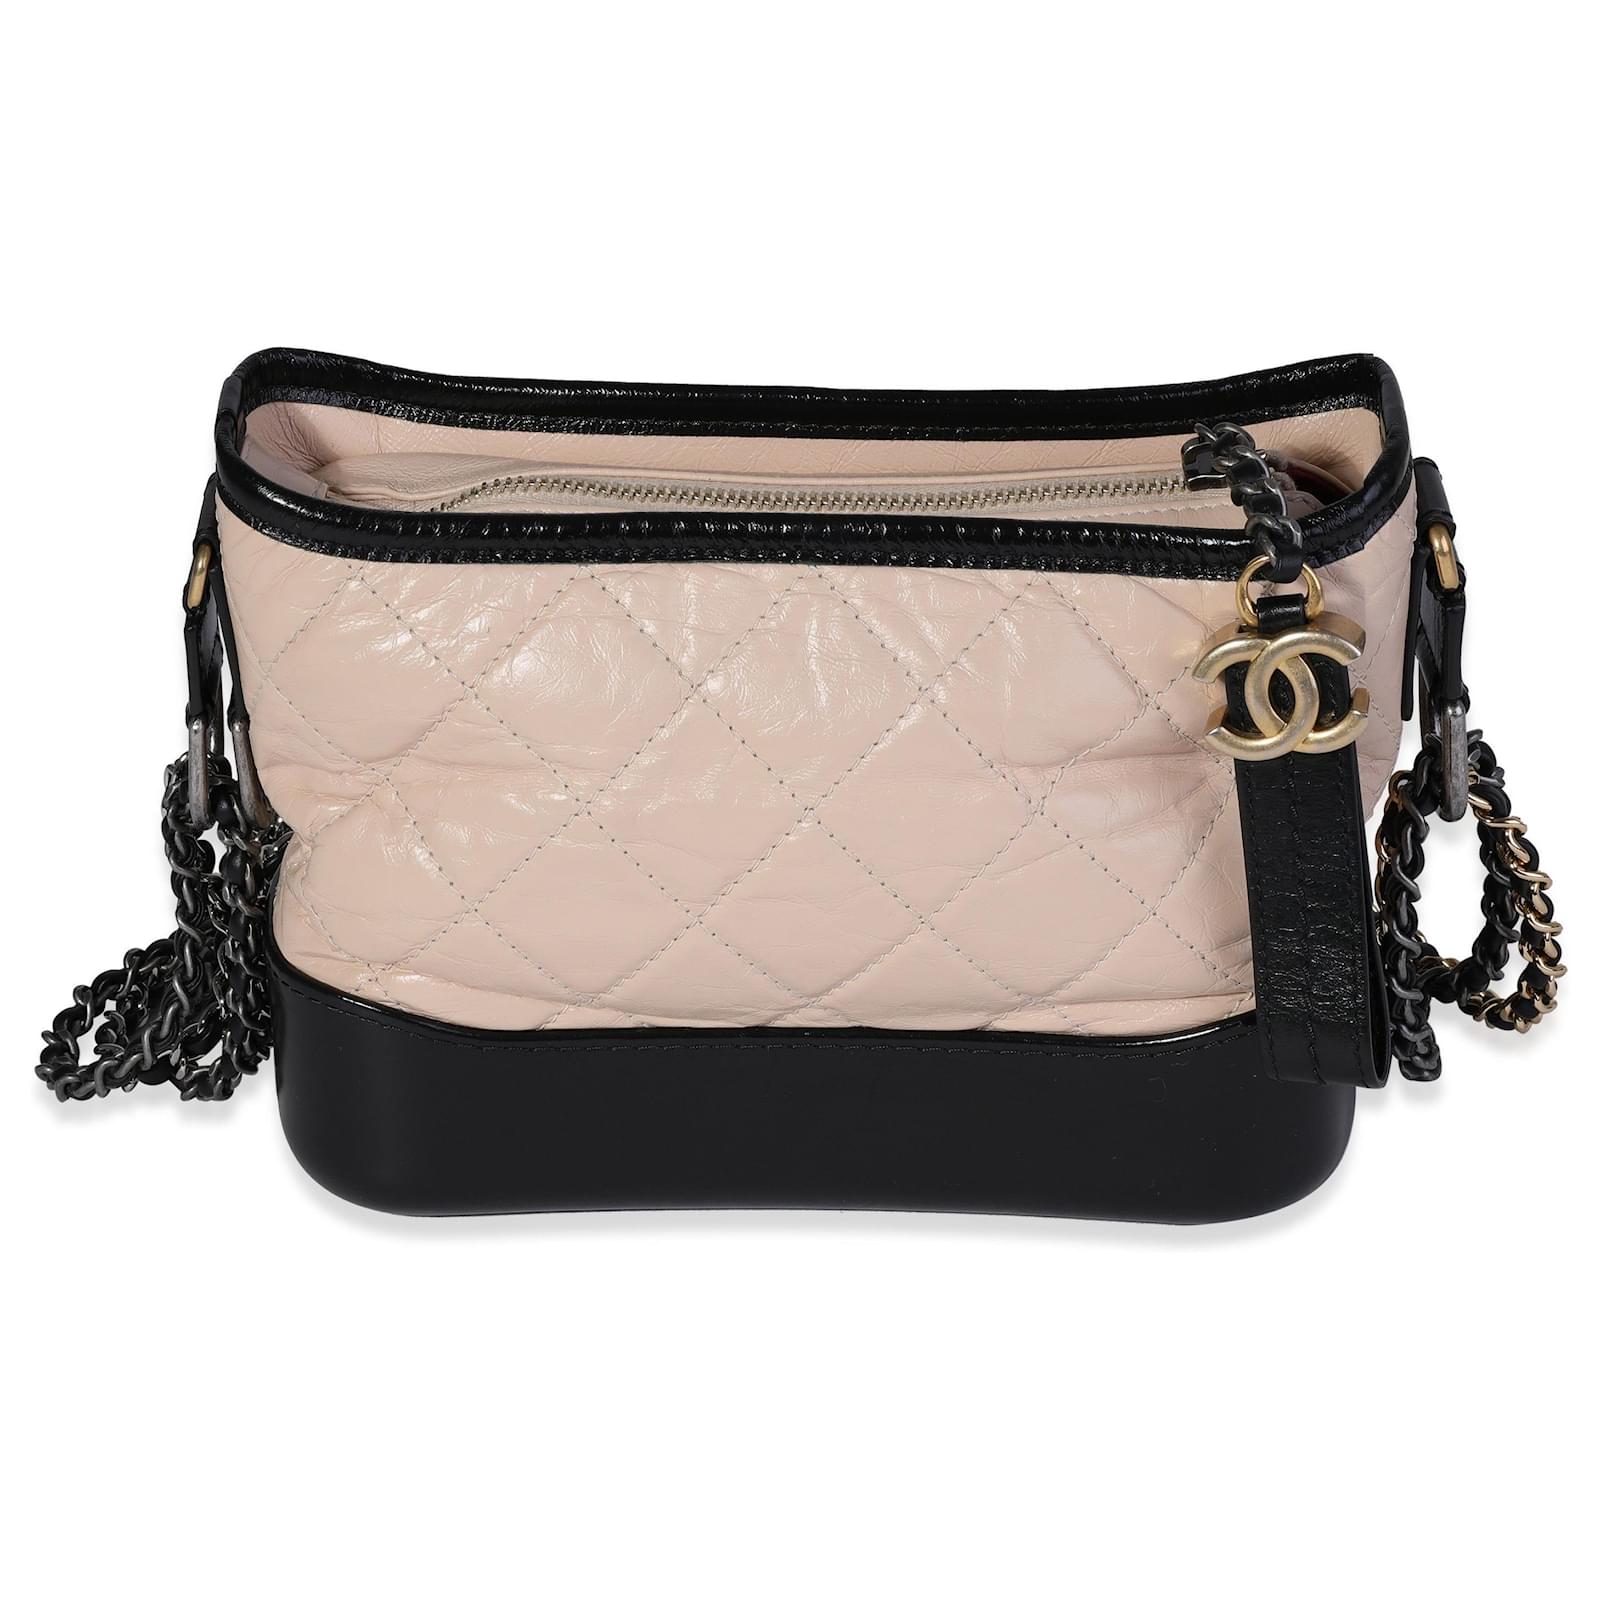 Chanel Black Quilted Leather Small Gabrielle Hobo Chanel